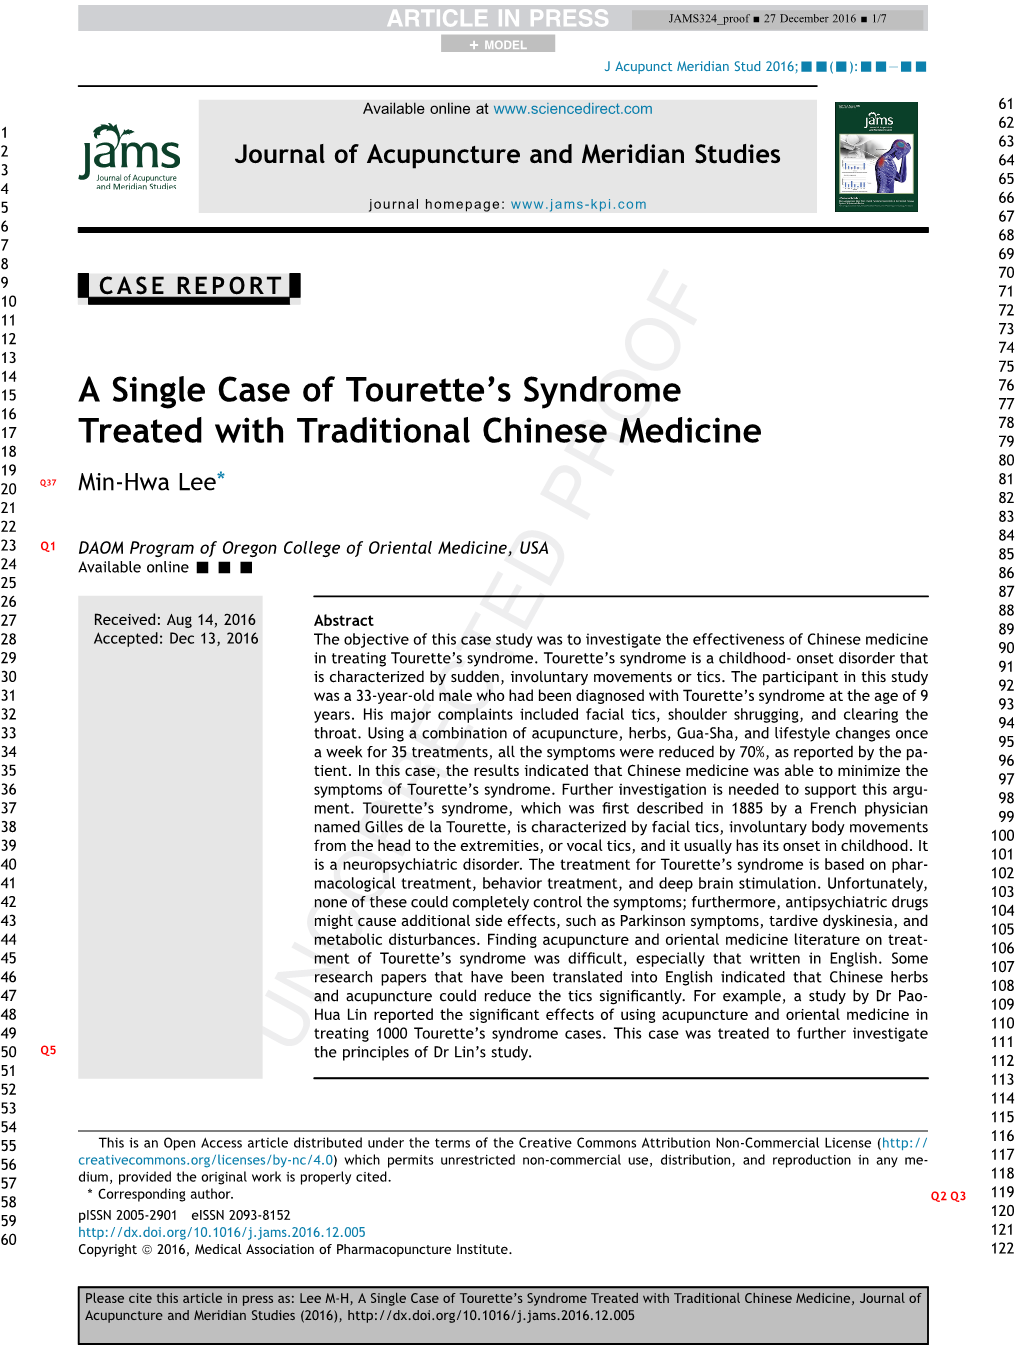 A Single Case of Tourette's Syndrome Treated with Traditional Chinese